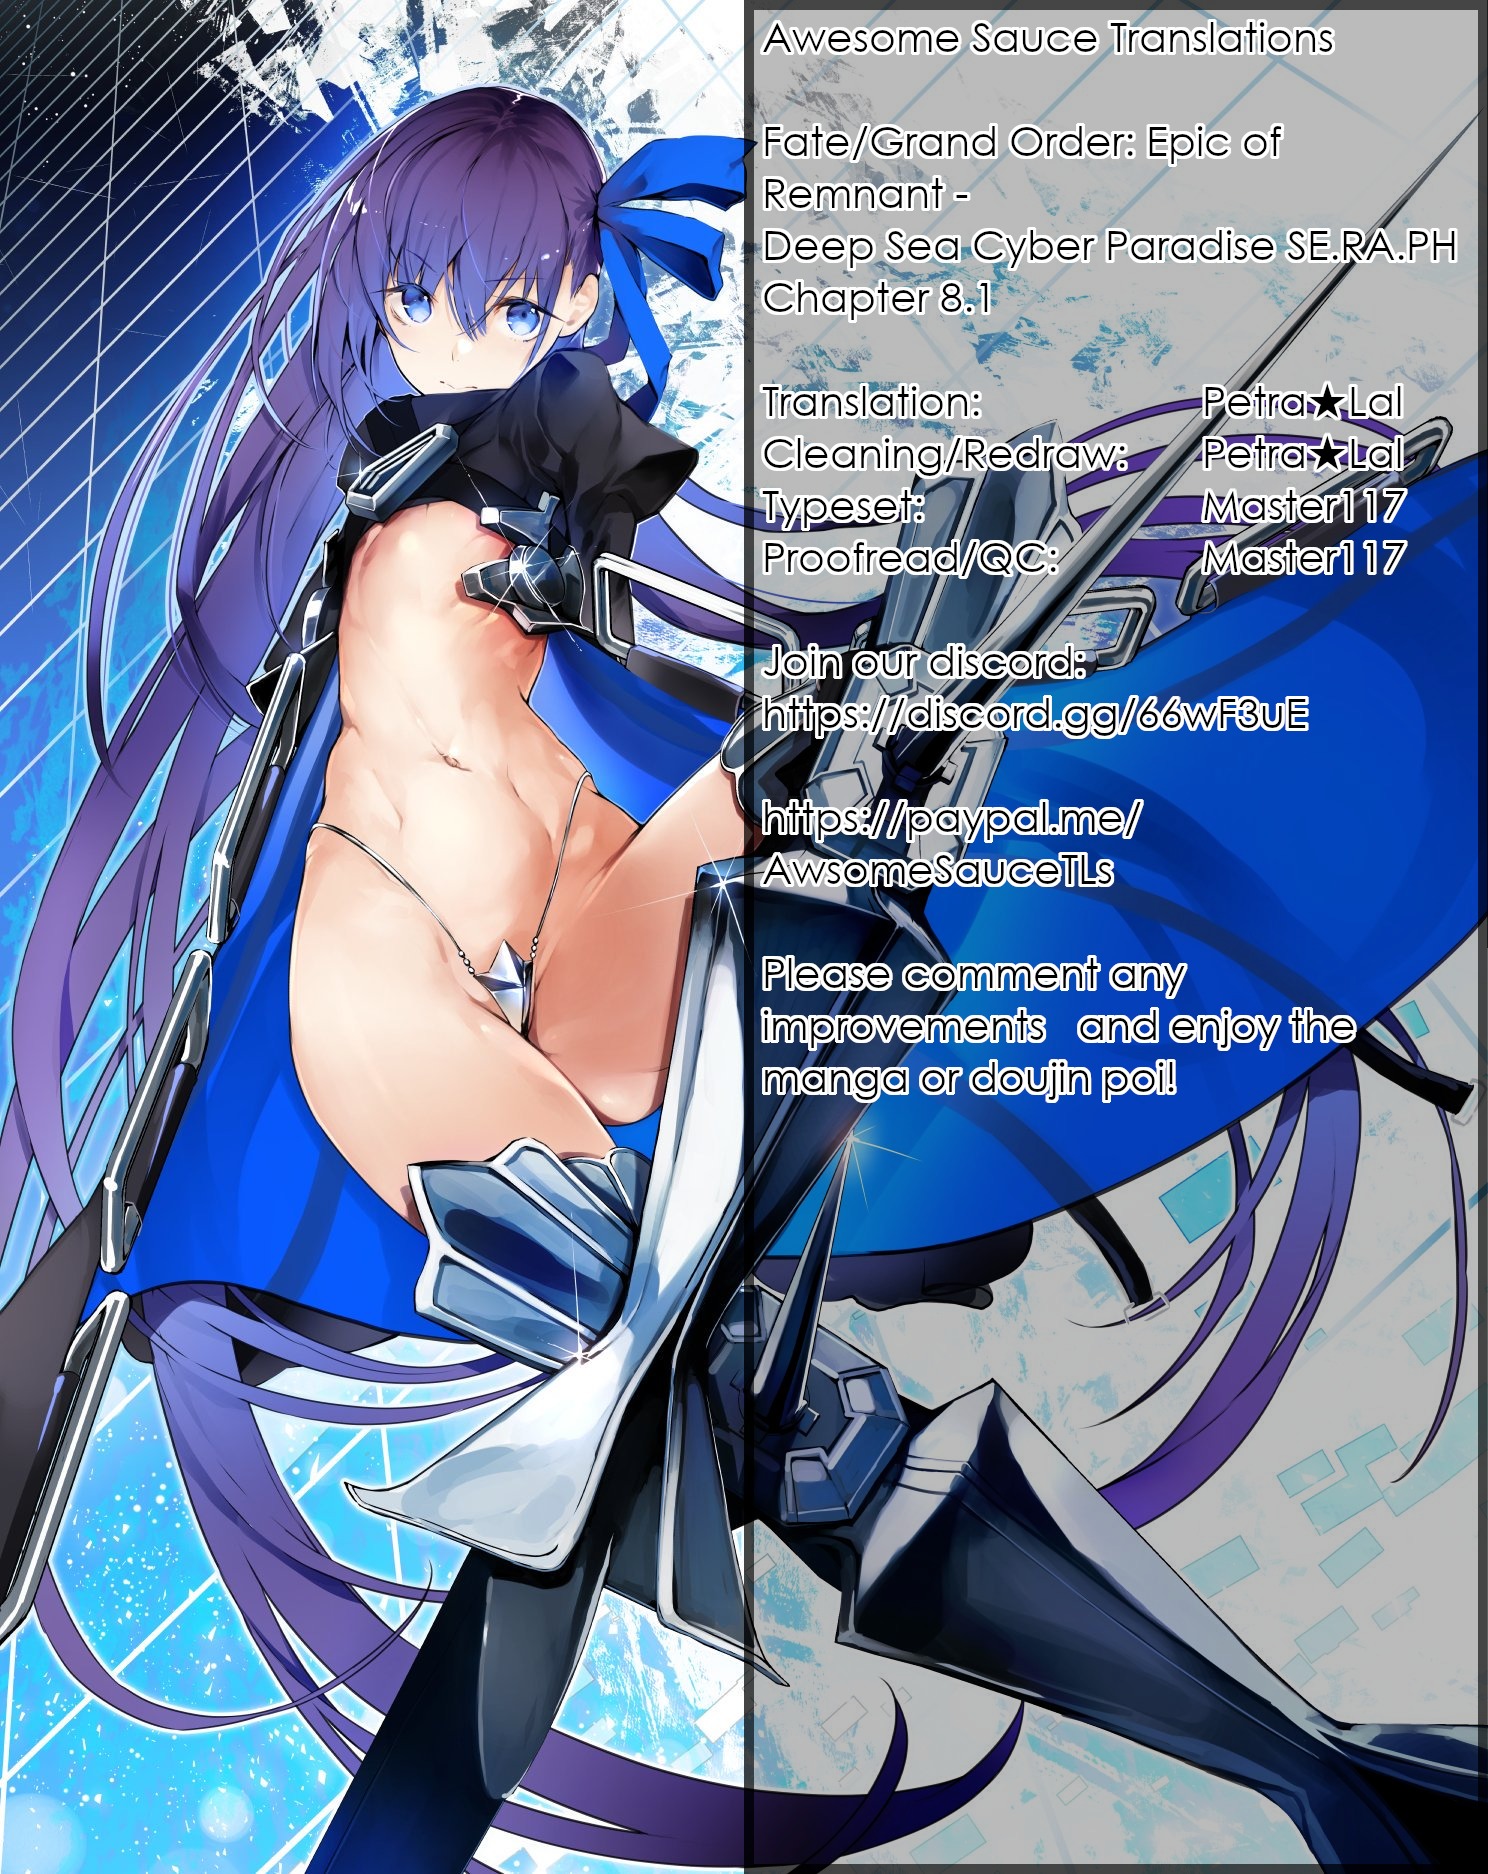 Fate/Grand Order -Epic of Remnant- Deep Sea Cyber-Paradise SE.RA.PH ch.8.1